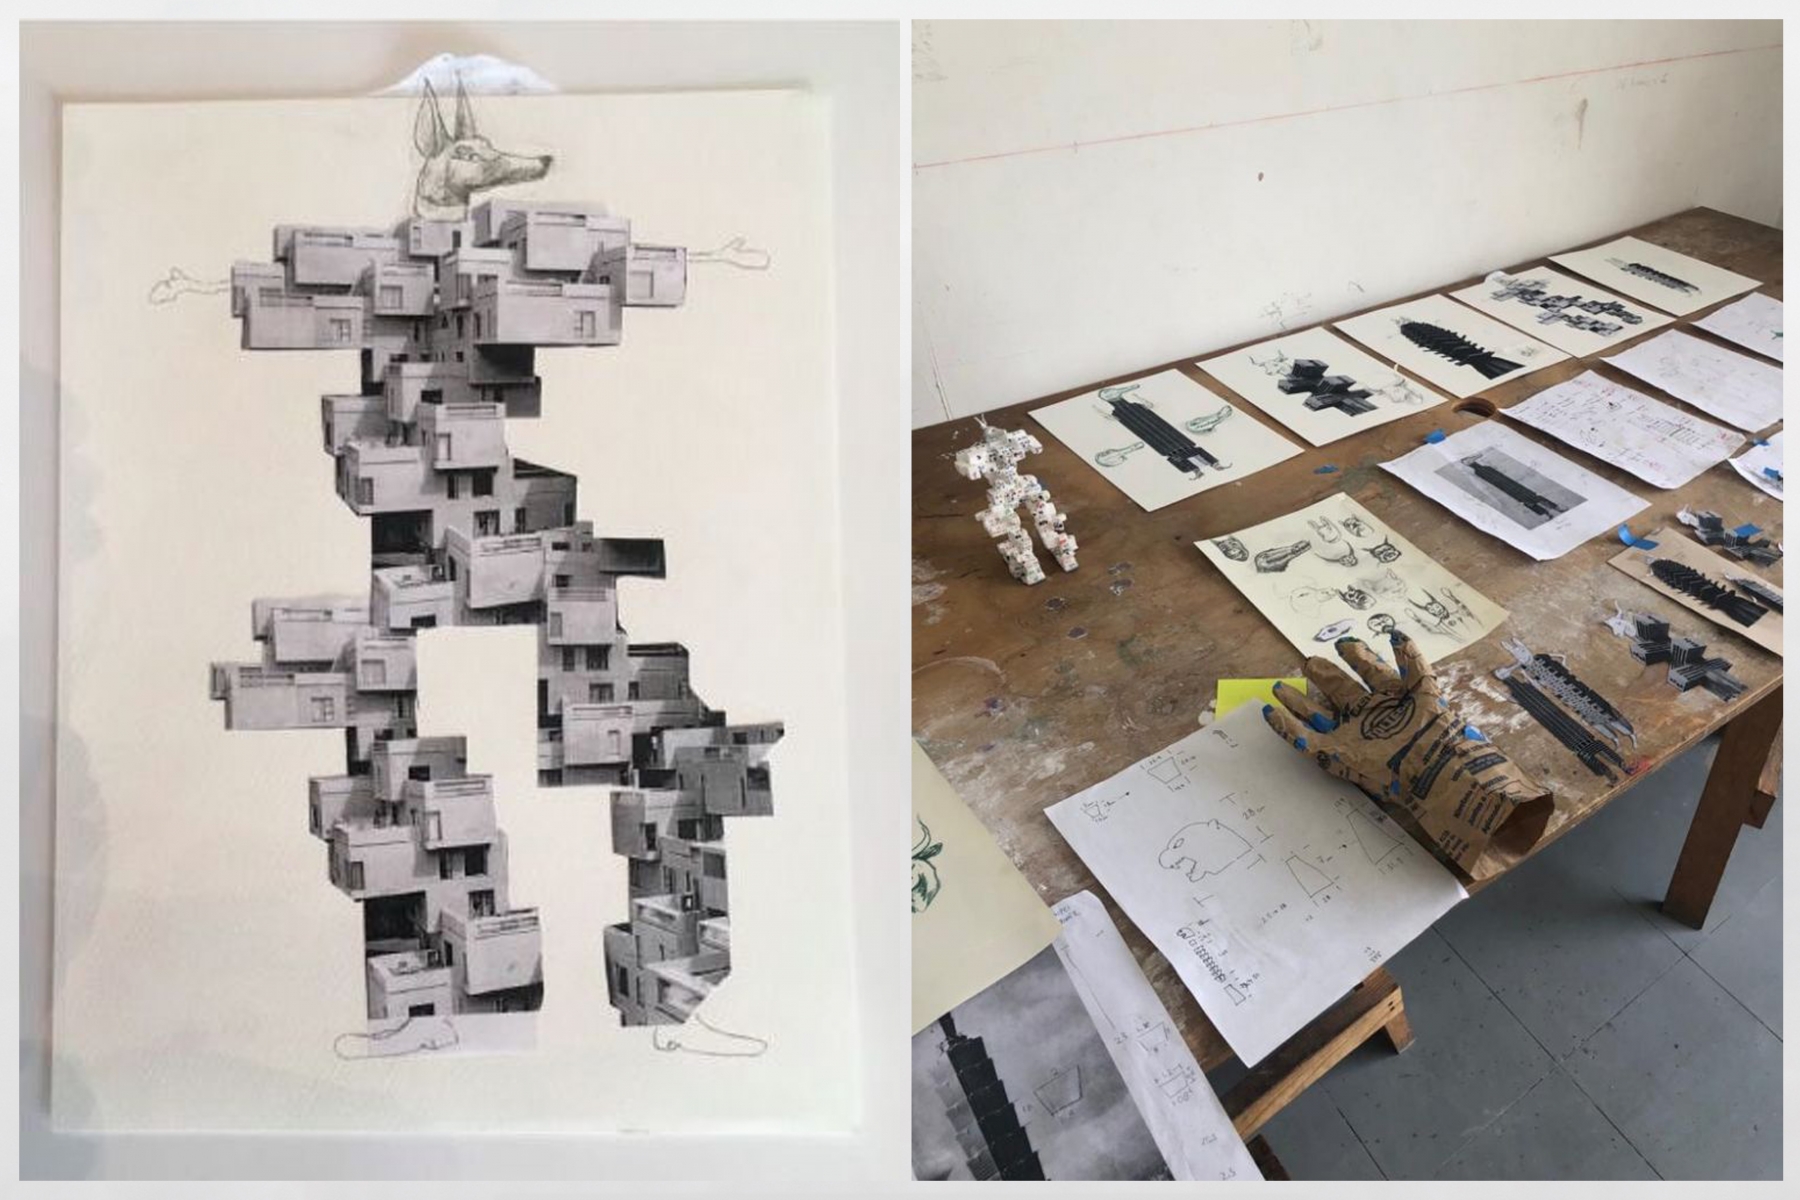 (left) Dami&aacute;n Ortega (1967), Zoobuilding project sketches 9, 2019, graphite on paper, 33 x 23.8 cm. (12.99 x 9.37 in.). (right)&nbsp;Dami&aacute;n&#39;s Mexico City studio.